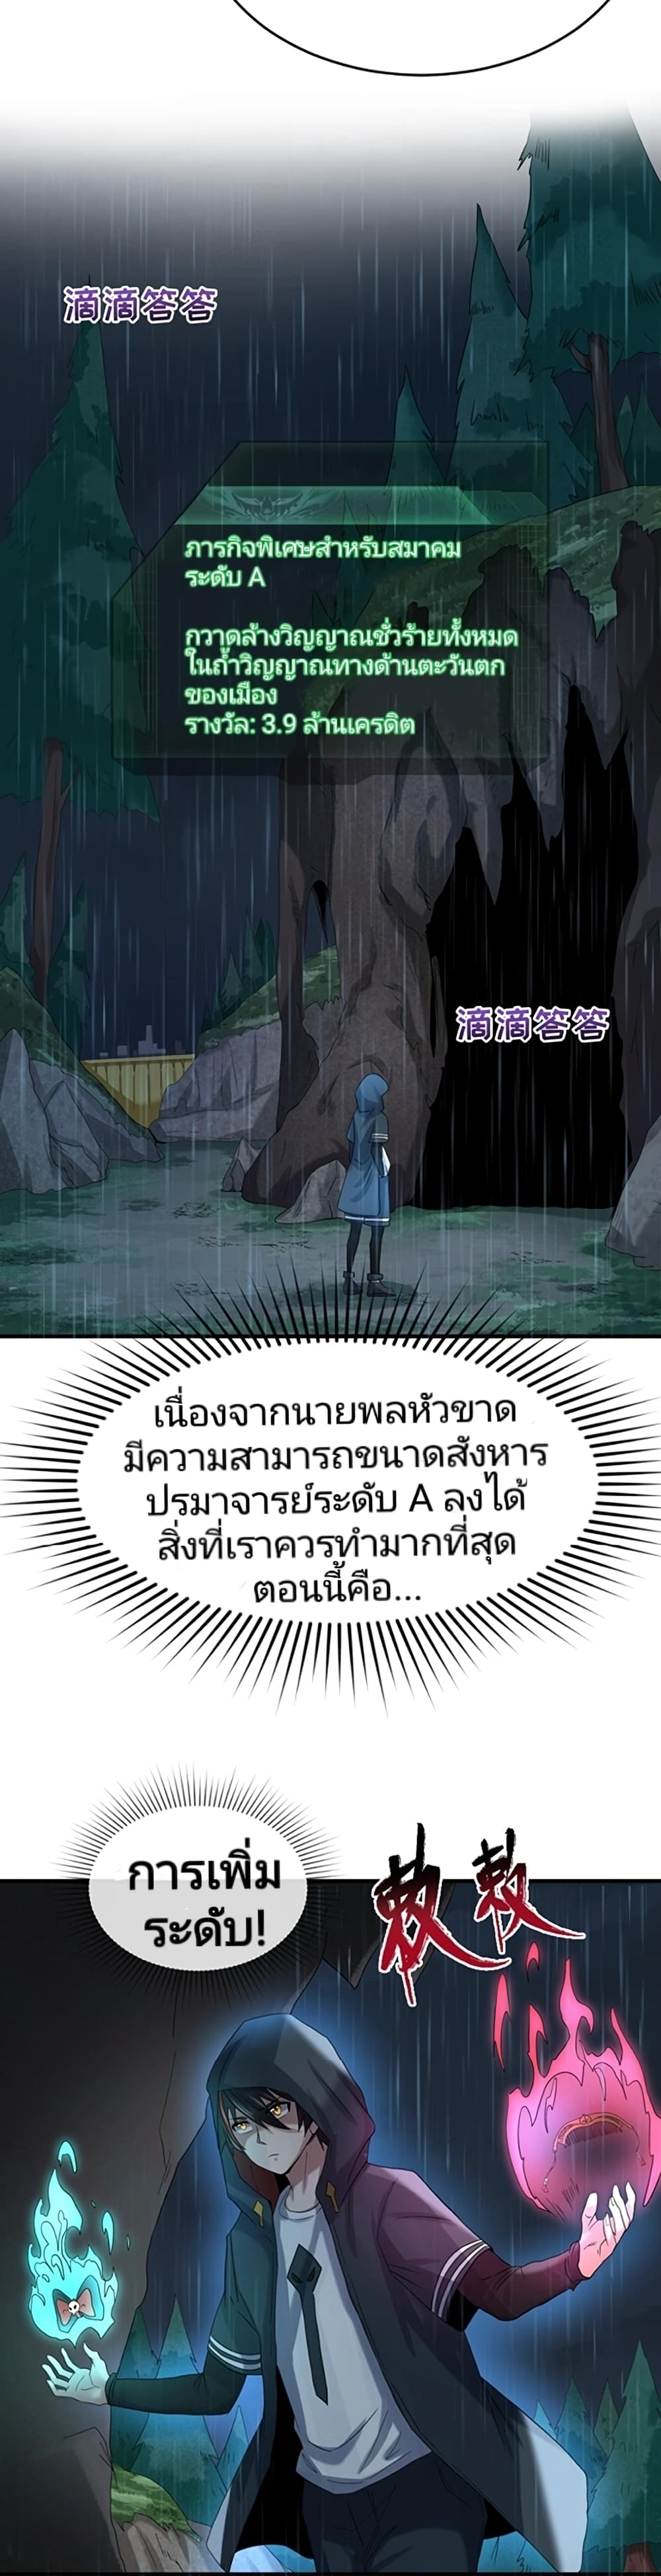 The Age of Ghost Spirits à¸à¸­à¸à¸à¸µà¹ 21 (20)